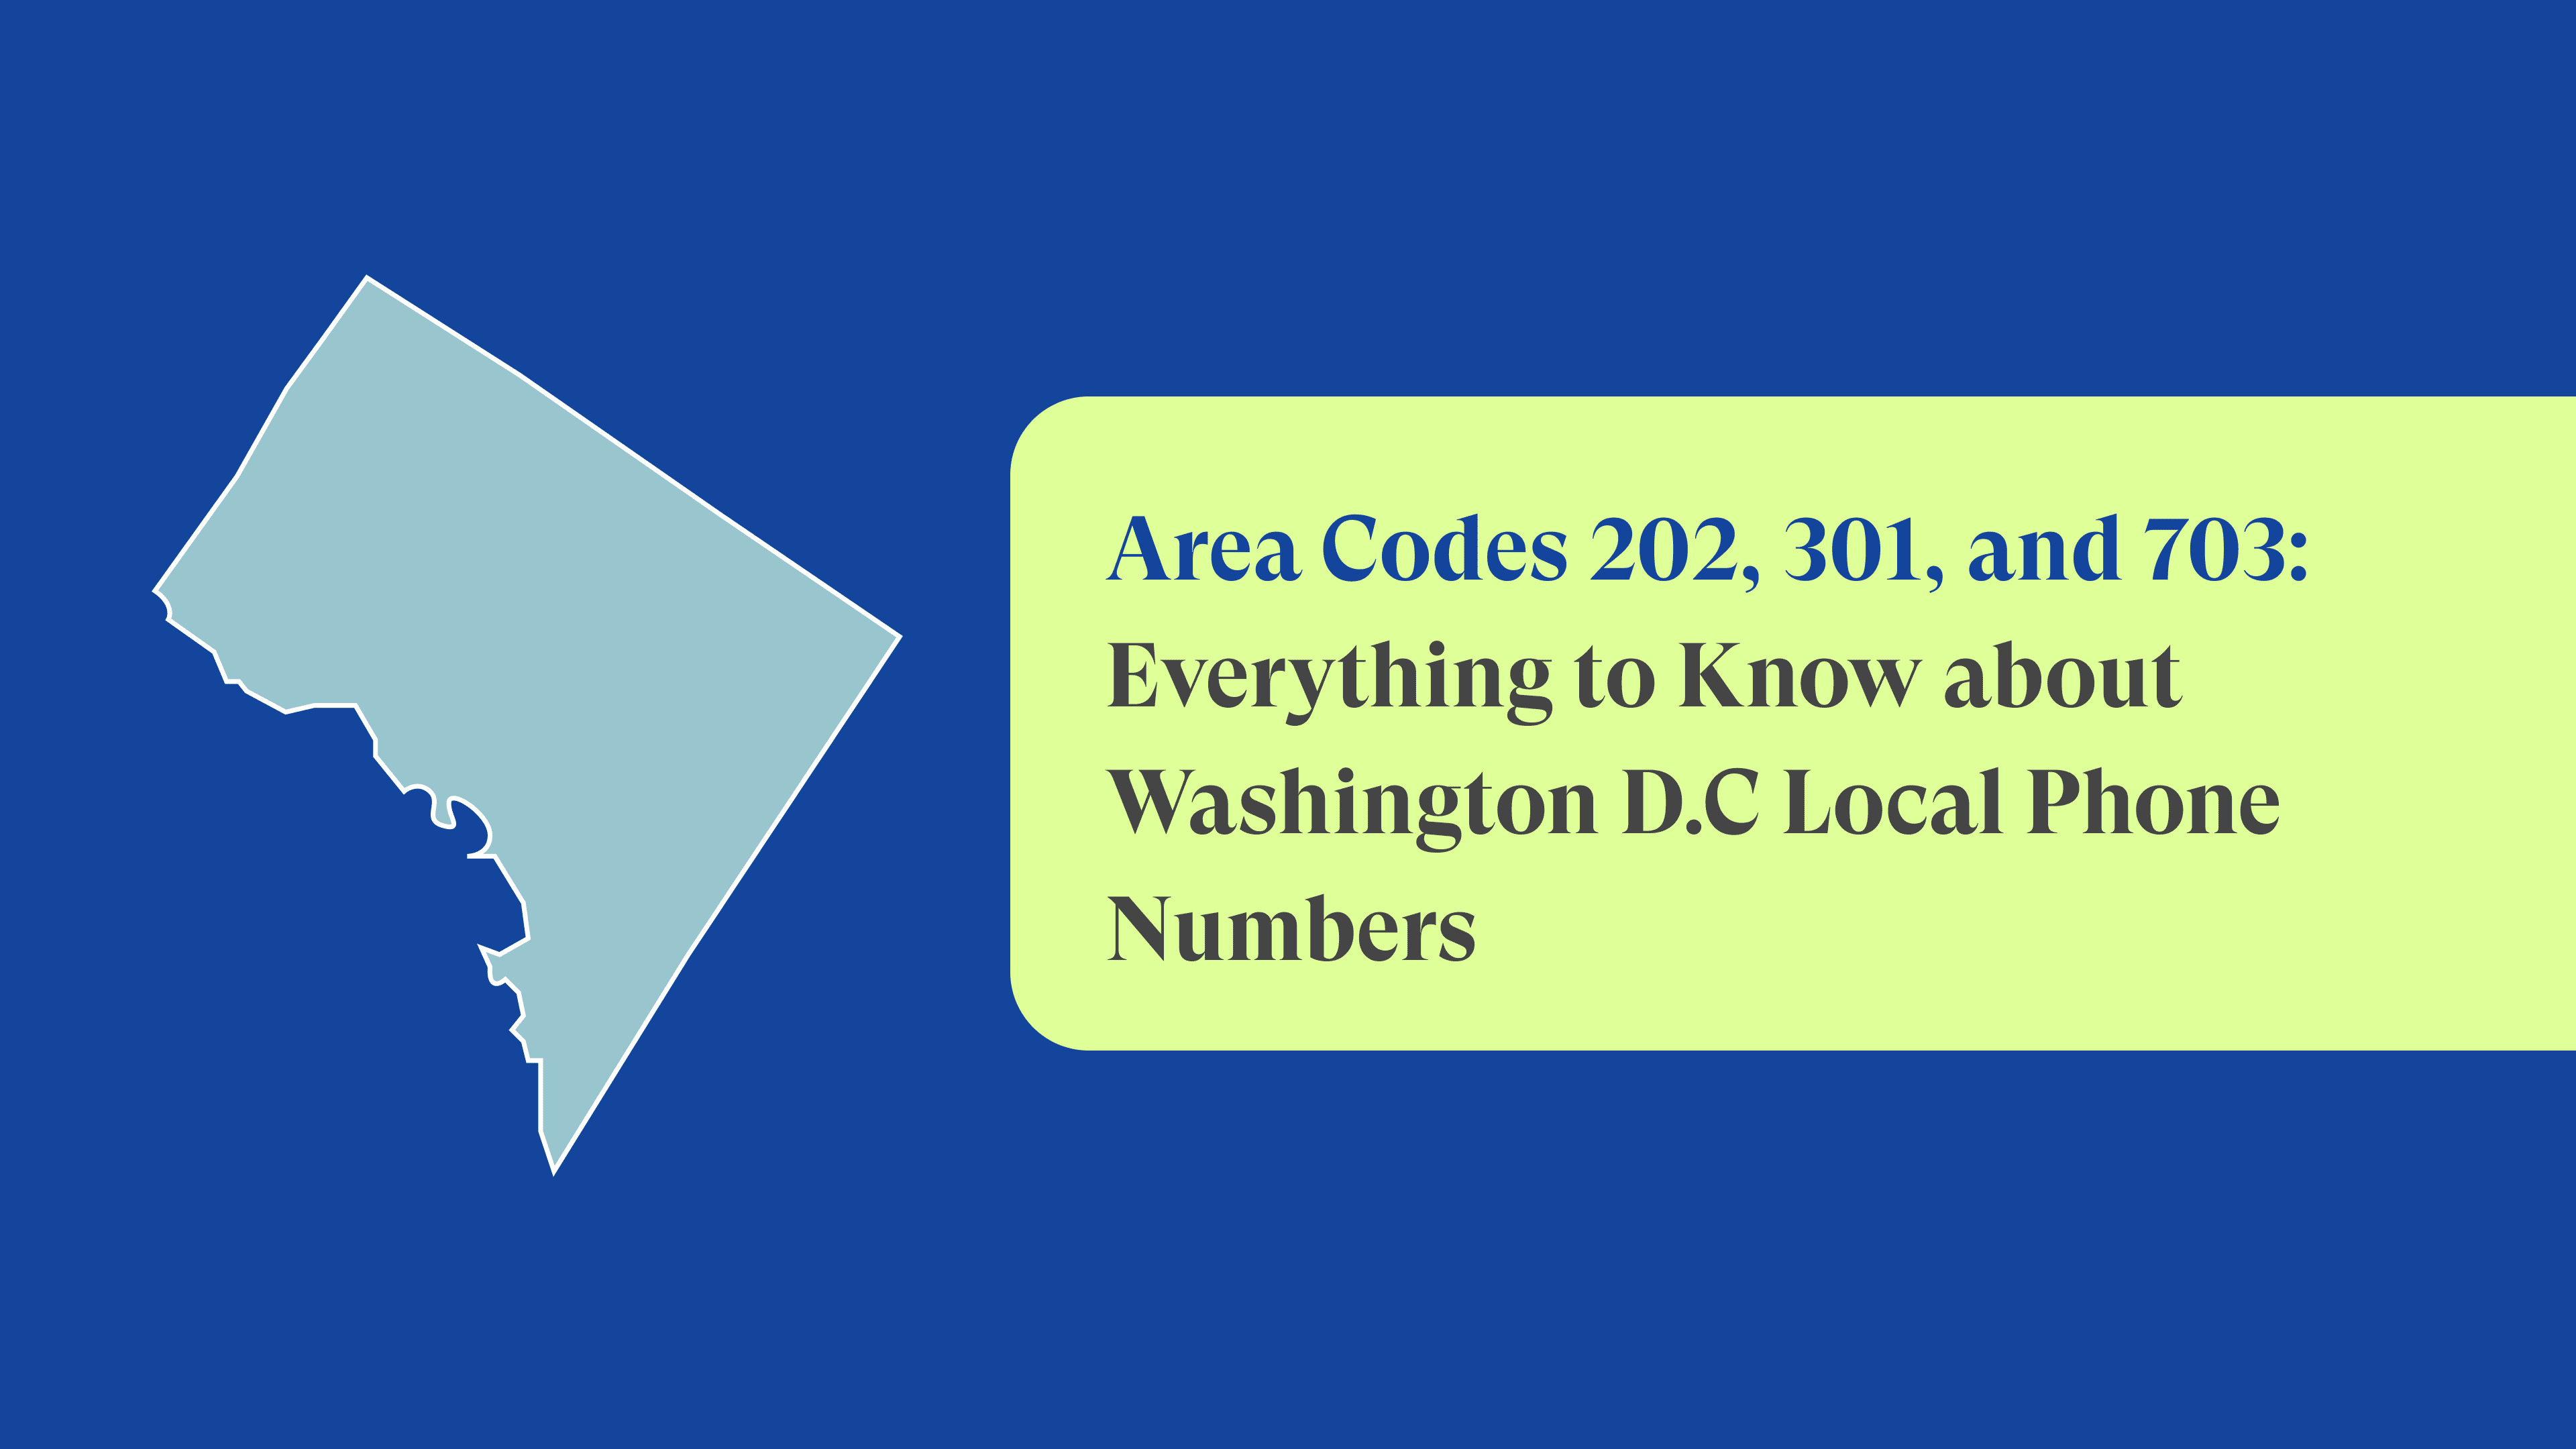 Washington D.C. Phone Numbers with Area Codes 202, 301, and 703